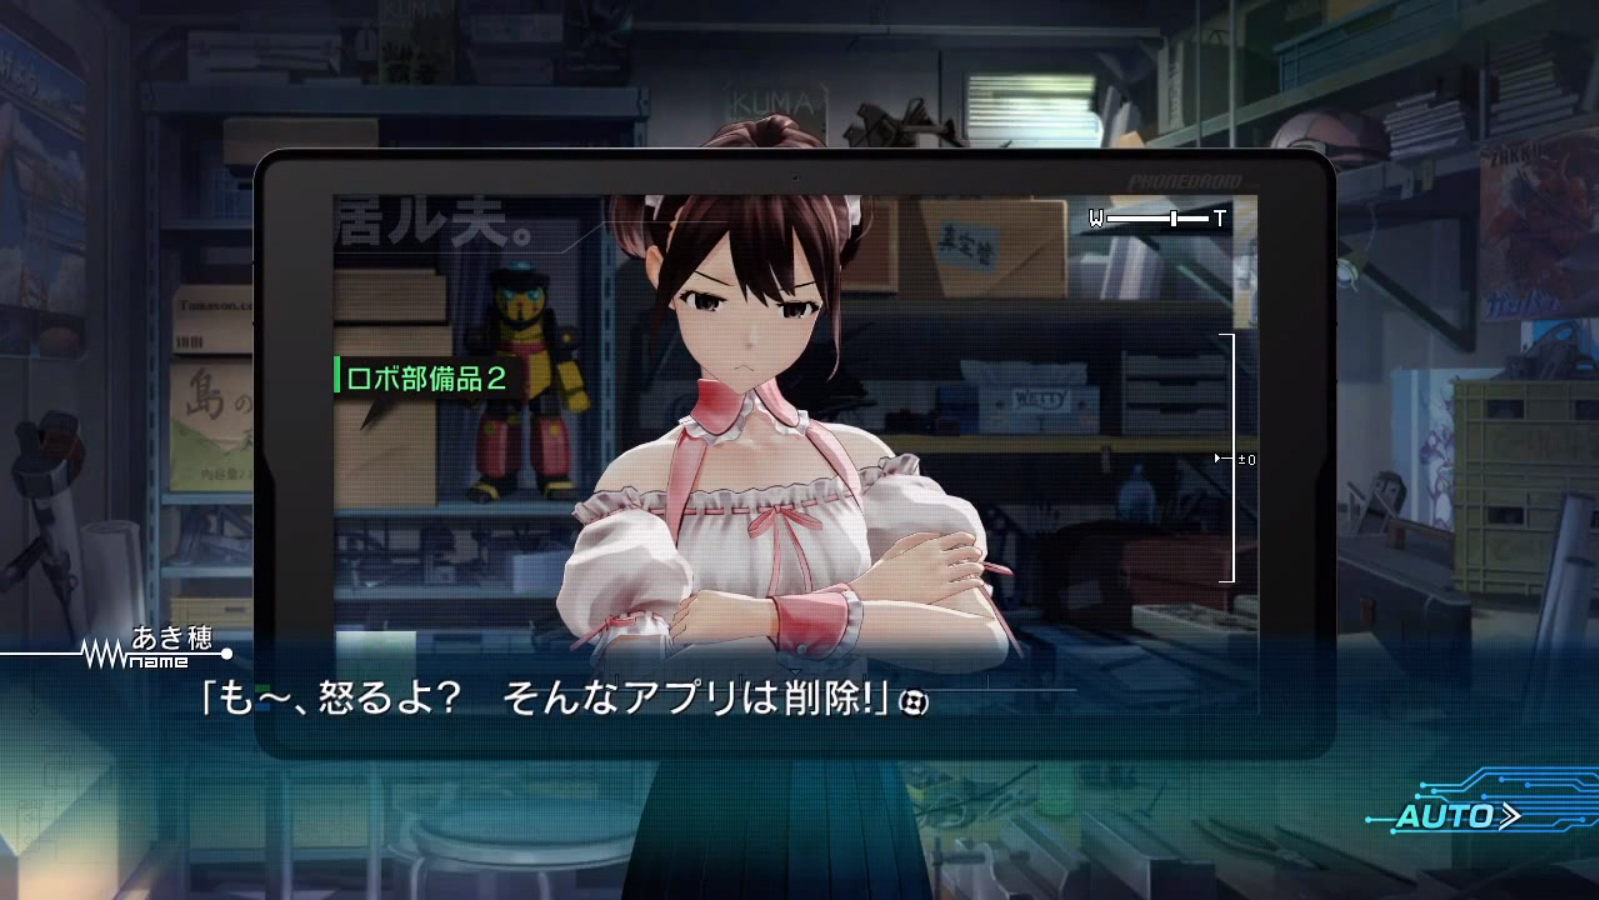 The Massive World Of Steins;Gate, Explained 